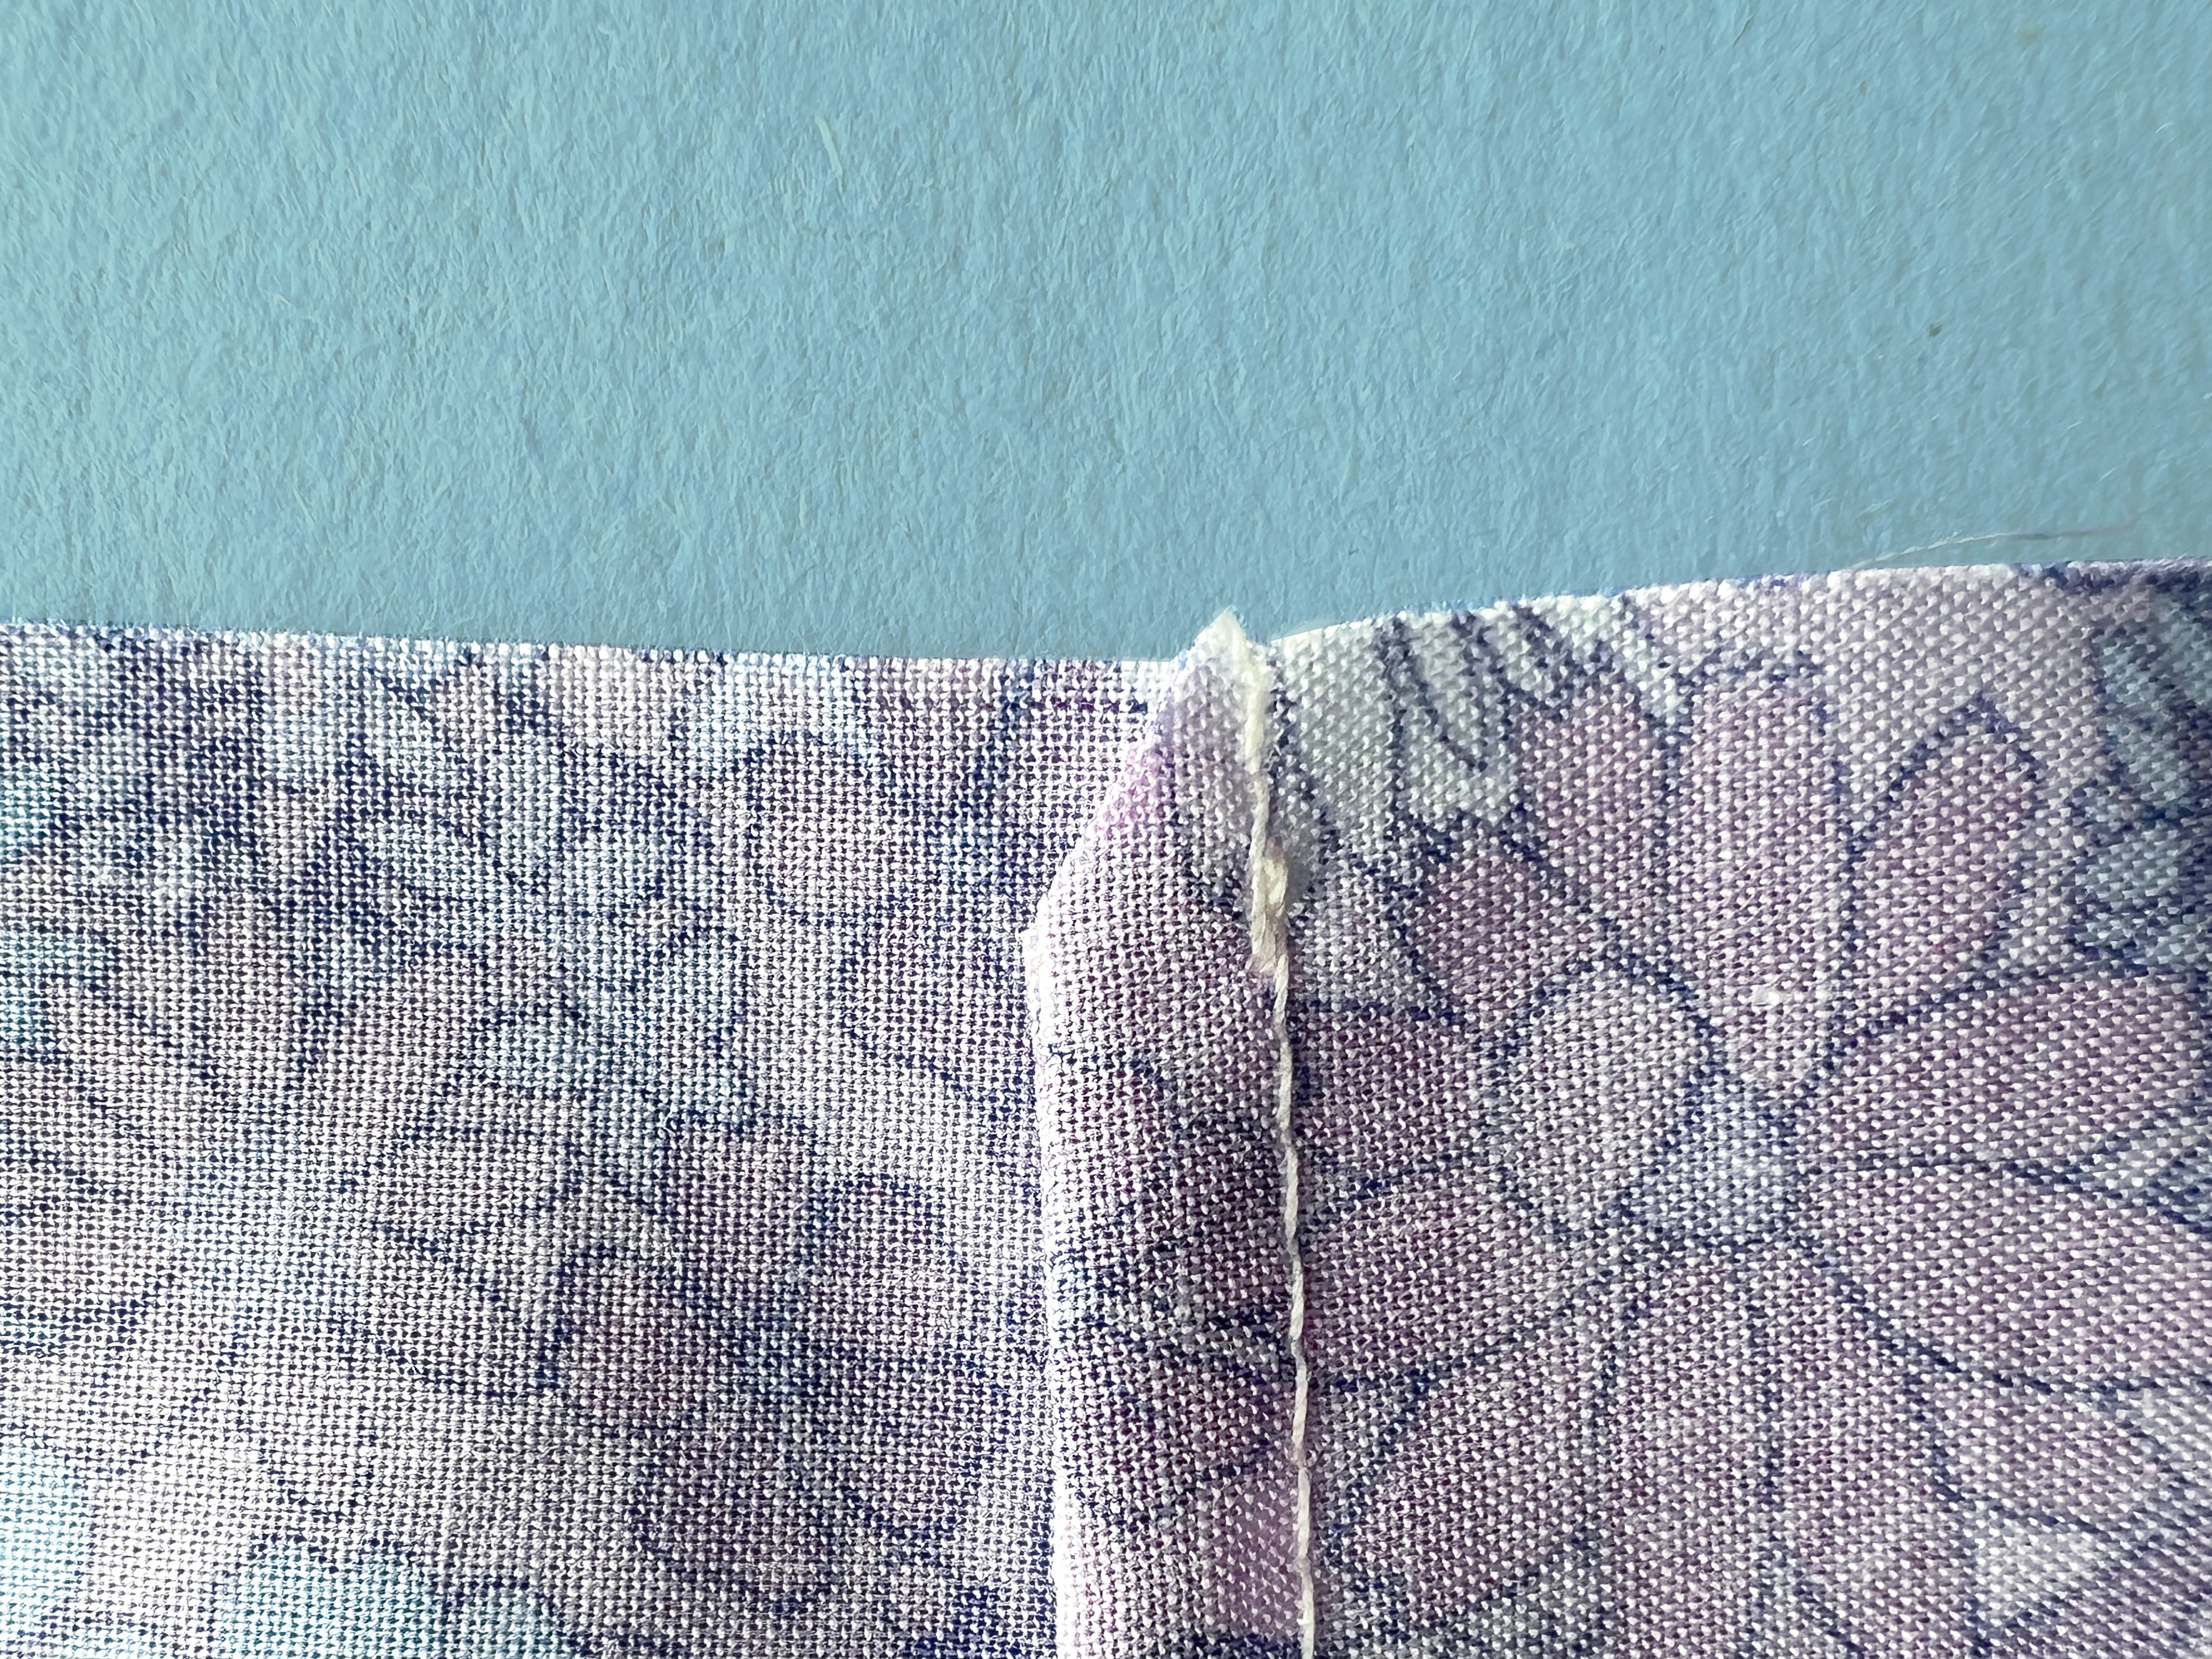 A French seam has been pressed to the side and clipped at an angle.